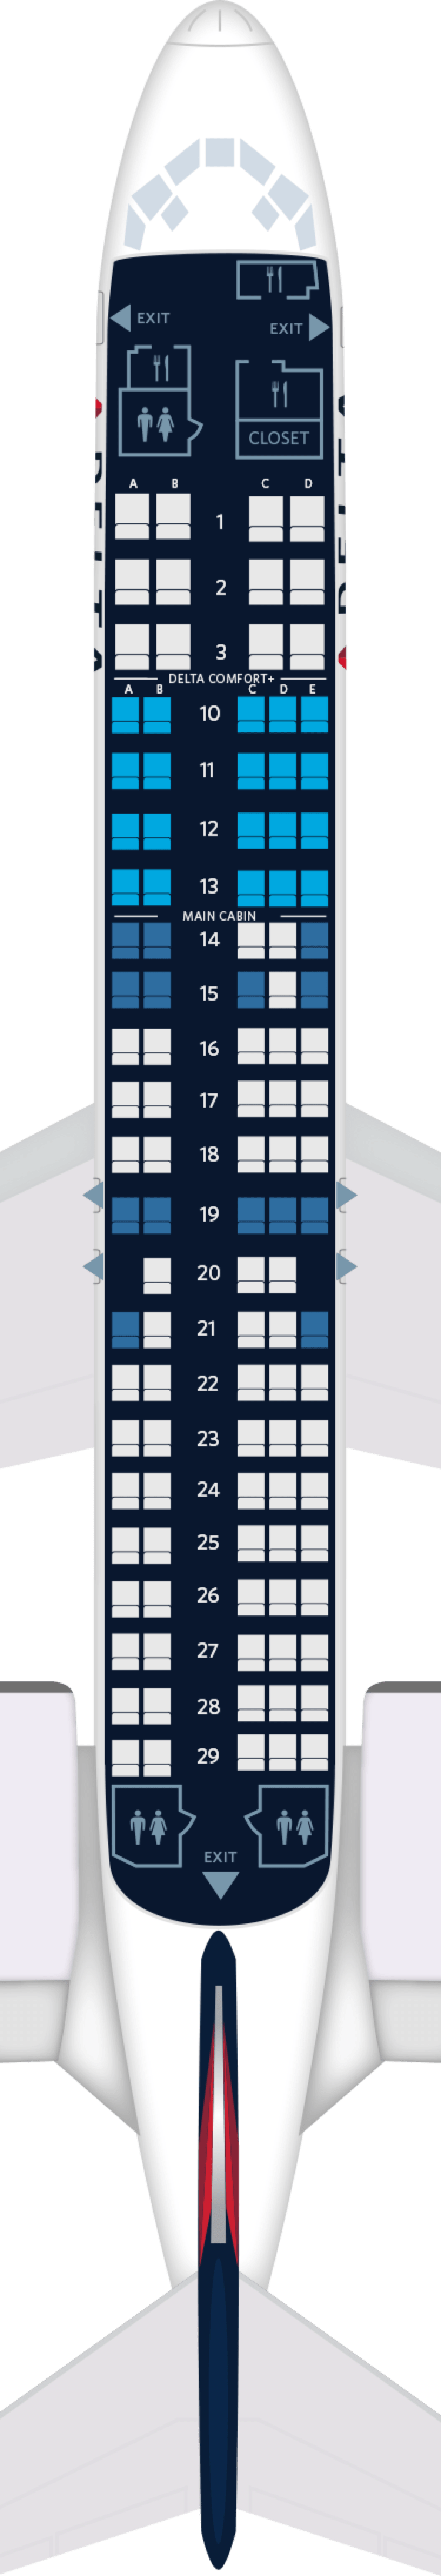 Boeing 717 Aircraft Seat Maps Specs Amenities Delta Air